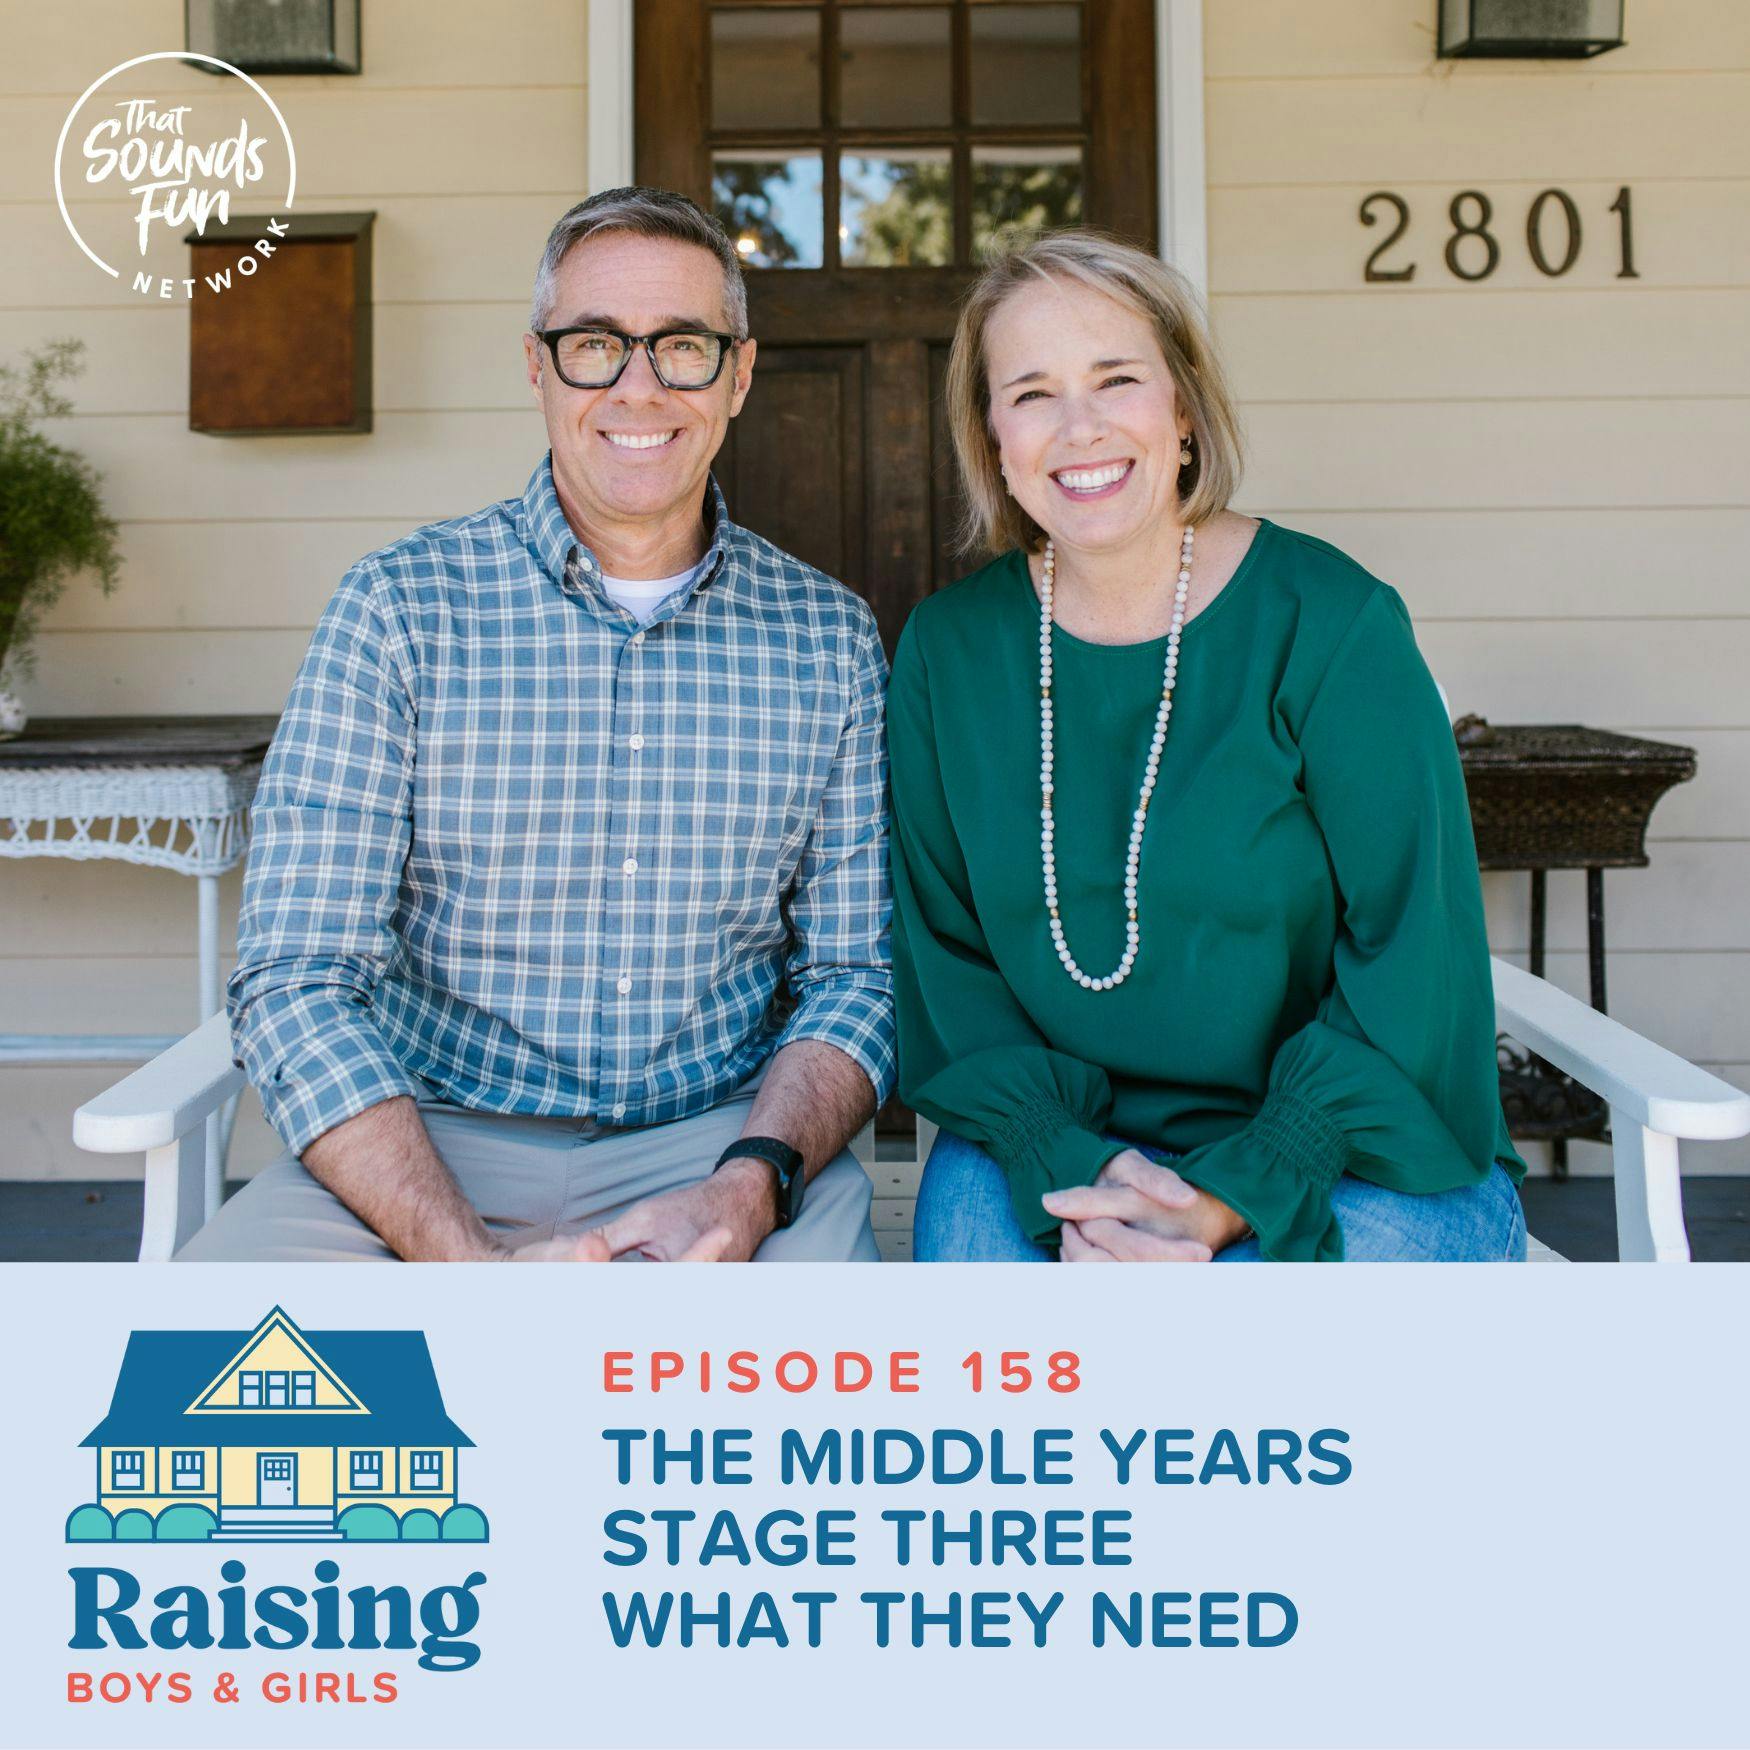 Episode 158: The Middle Years: Stage 3 - What They Need